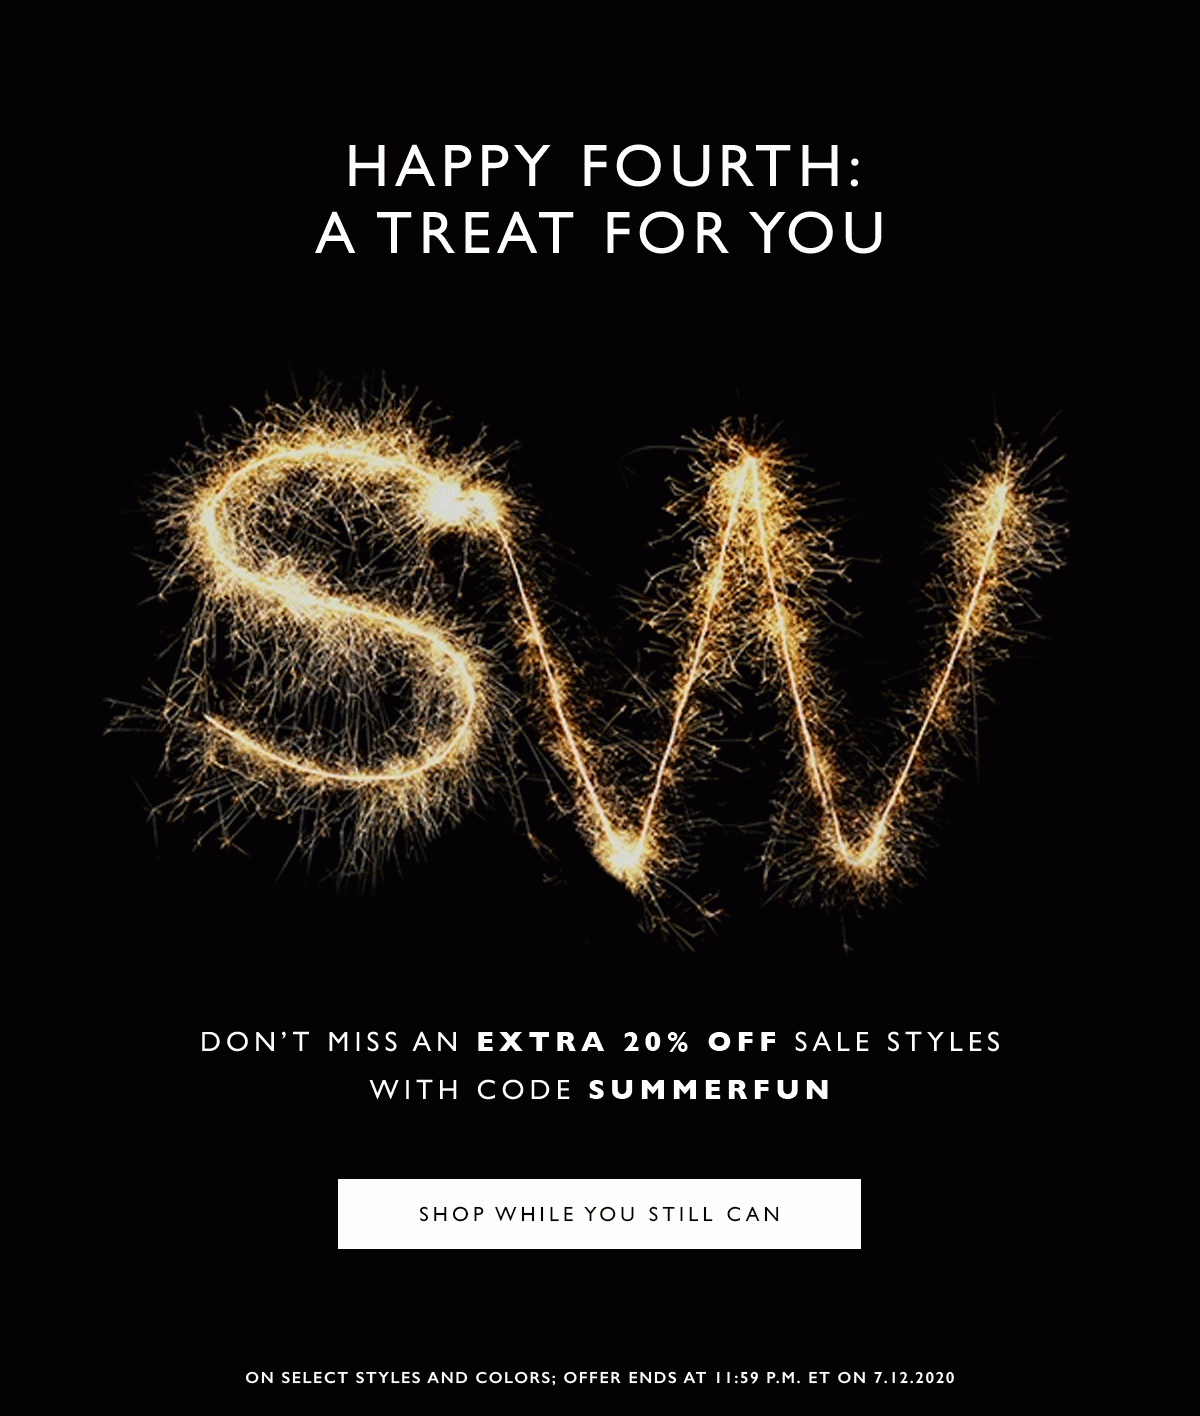  Happy Fourth: A Treat for You Don’t miss an extra 20% off sale styles with code SUMMERFUN. SHOP WHILE YOU STILL CAN. On select styles and colors; offer ends at 11:59 P.M. ET on 7.12.2020